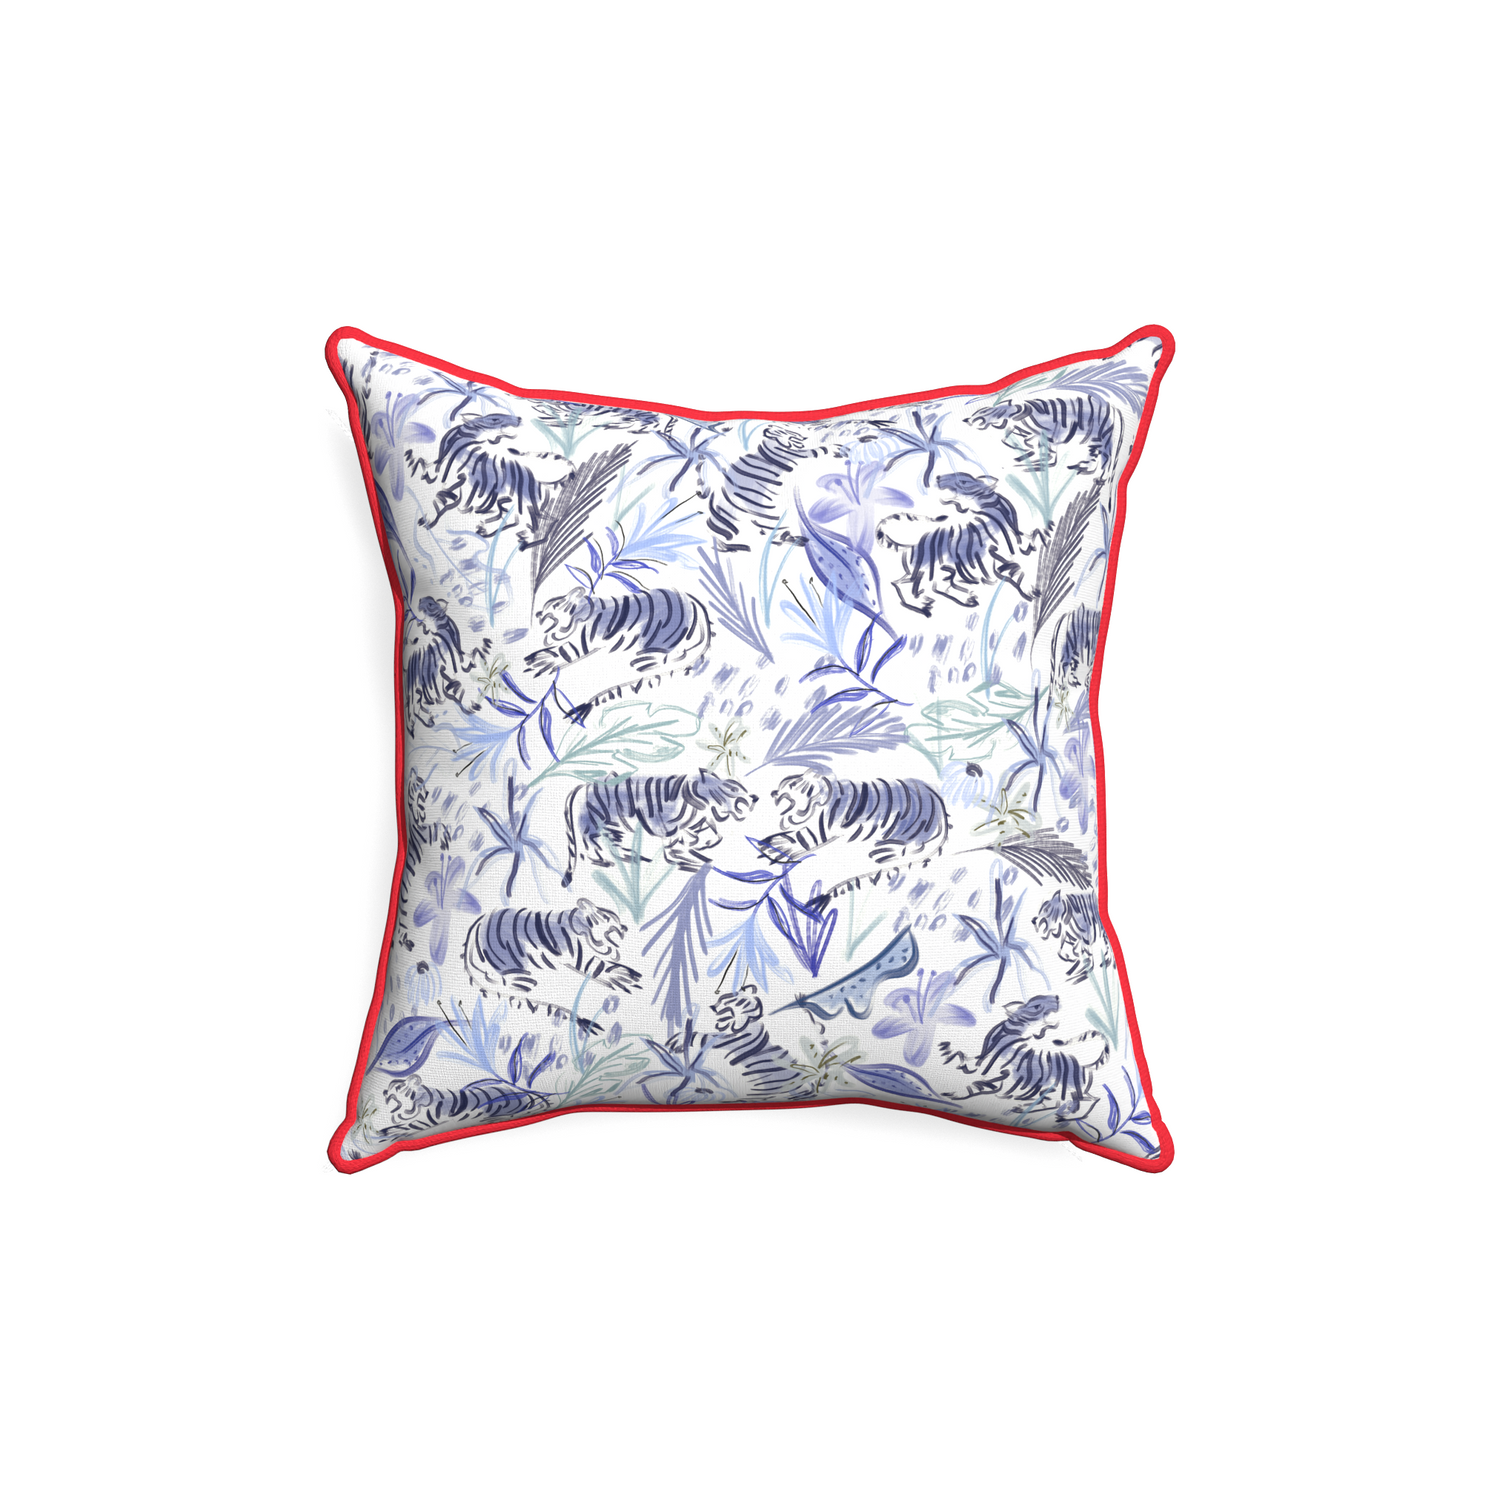 18-square frida blue custom blue with intricate tiger designpillow with cherry piping on white background